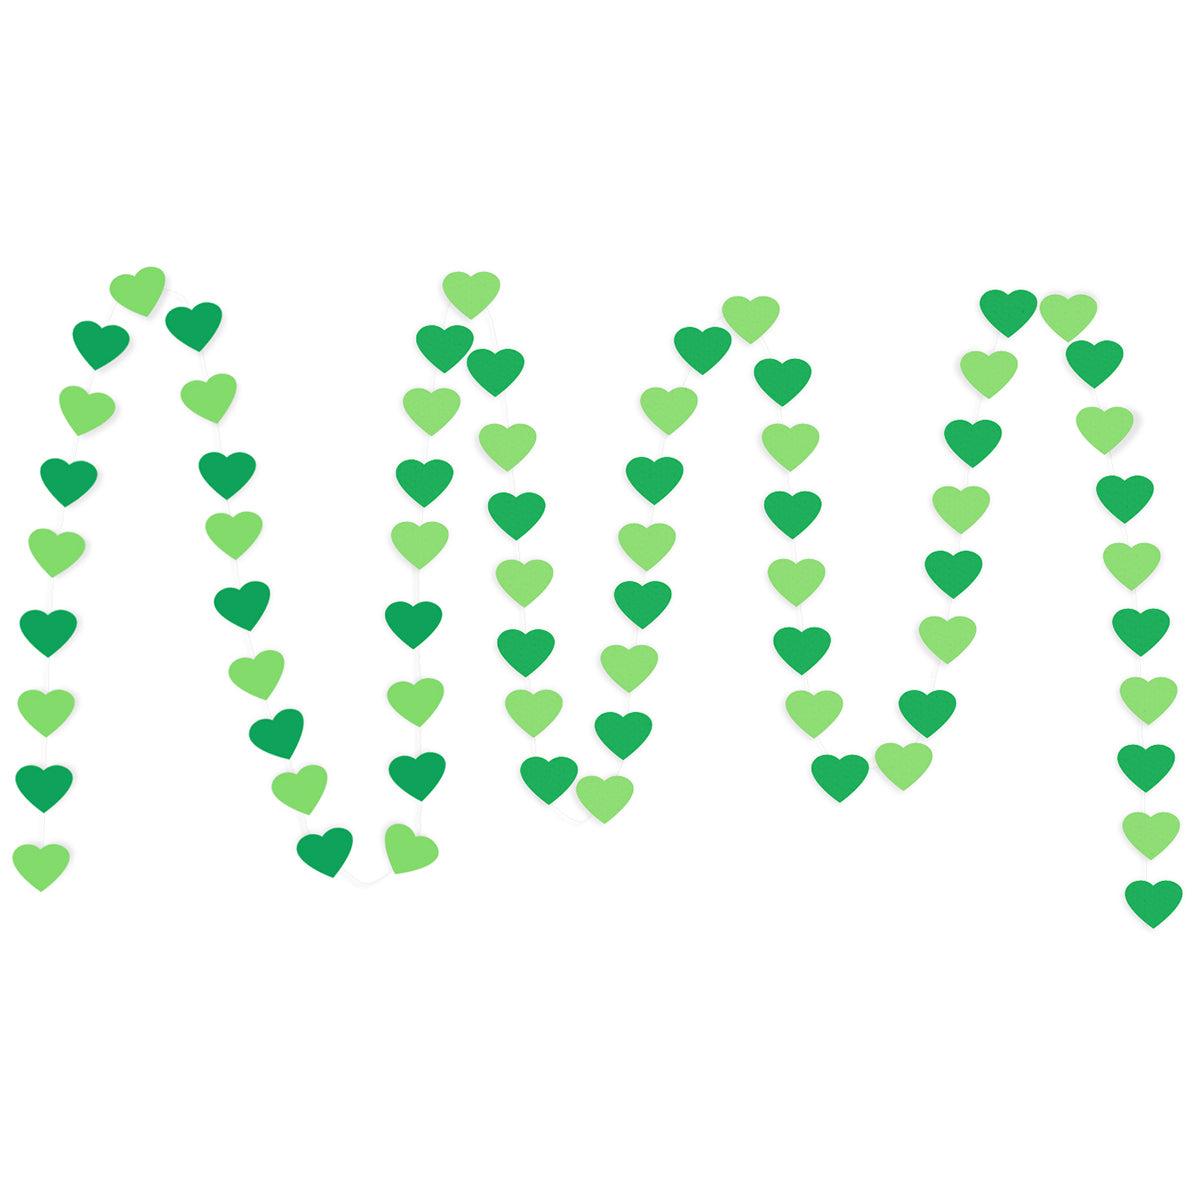 A string of Green & Dark Green Hearts Paper Garland show with a white background. 